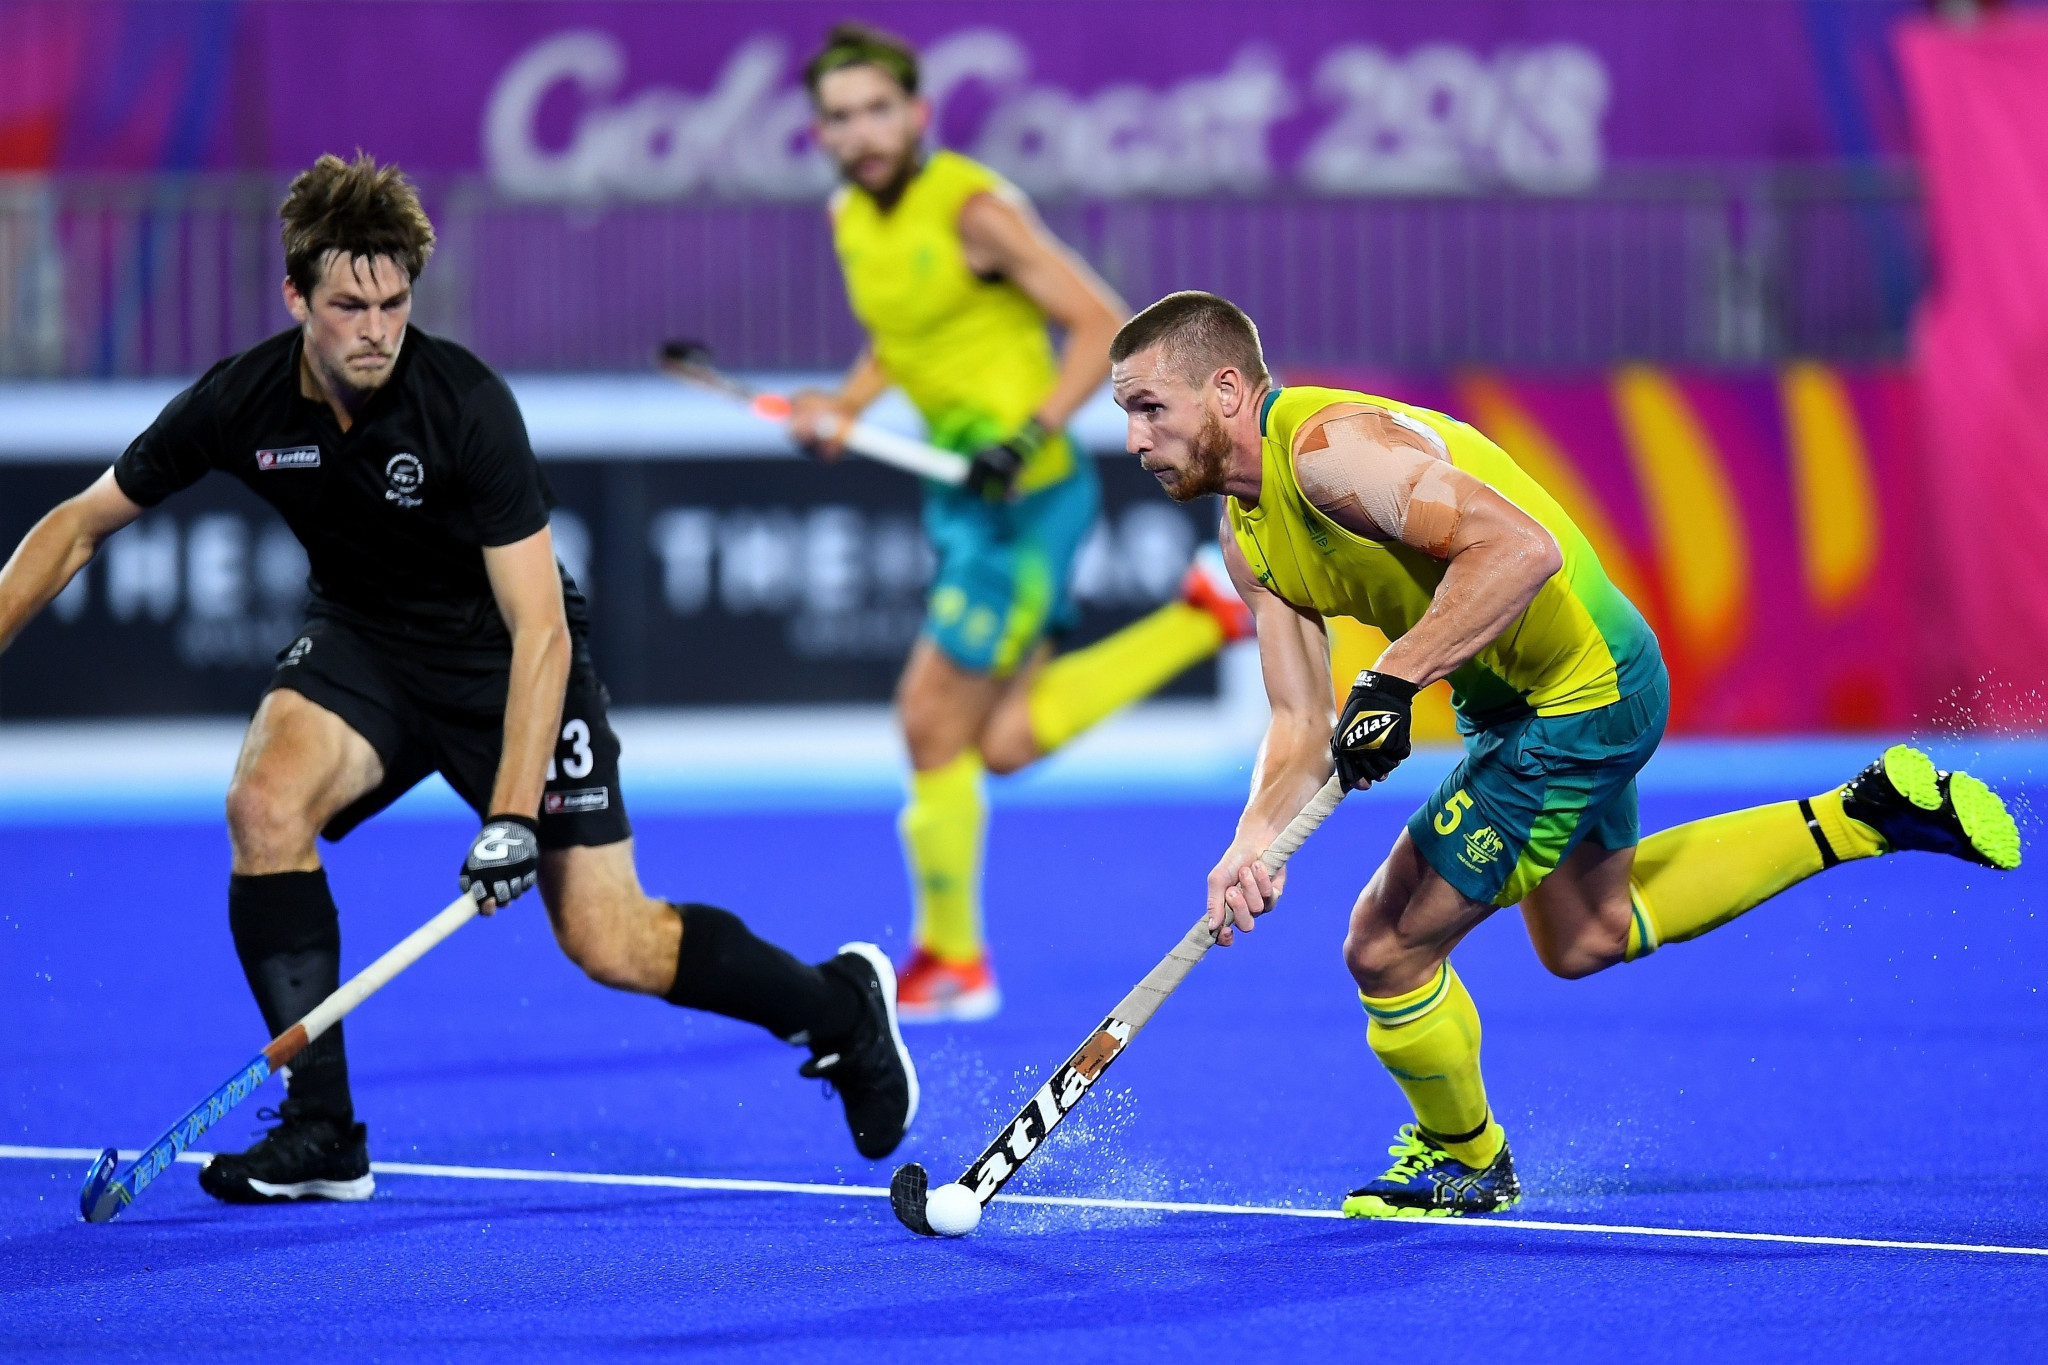 Australia had mixed fortunes in the hockey gold medal matches with the men's team beating New Zealand after the women's team had lost to the Kiwis ©Getty Images